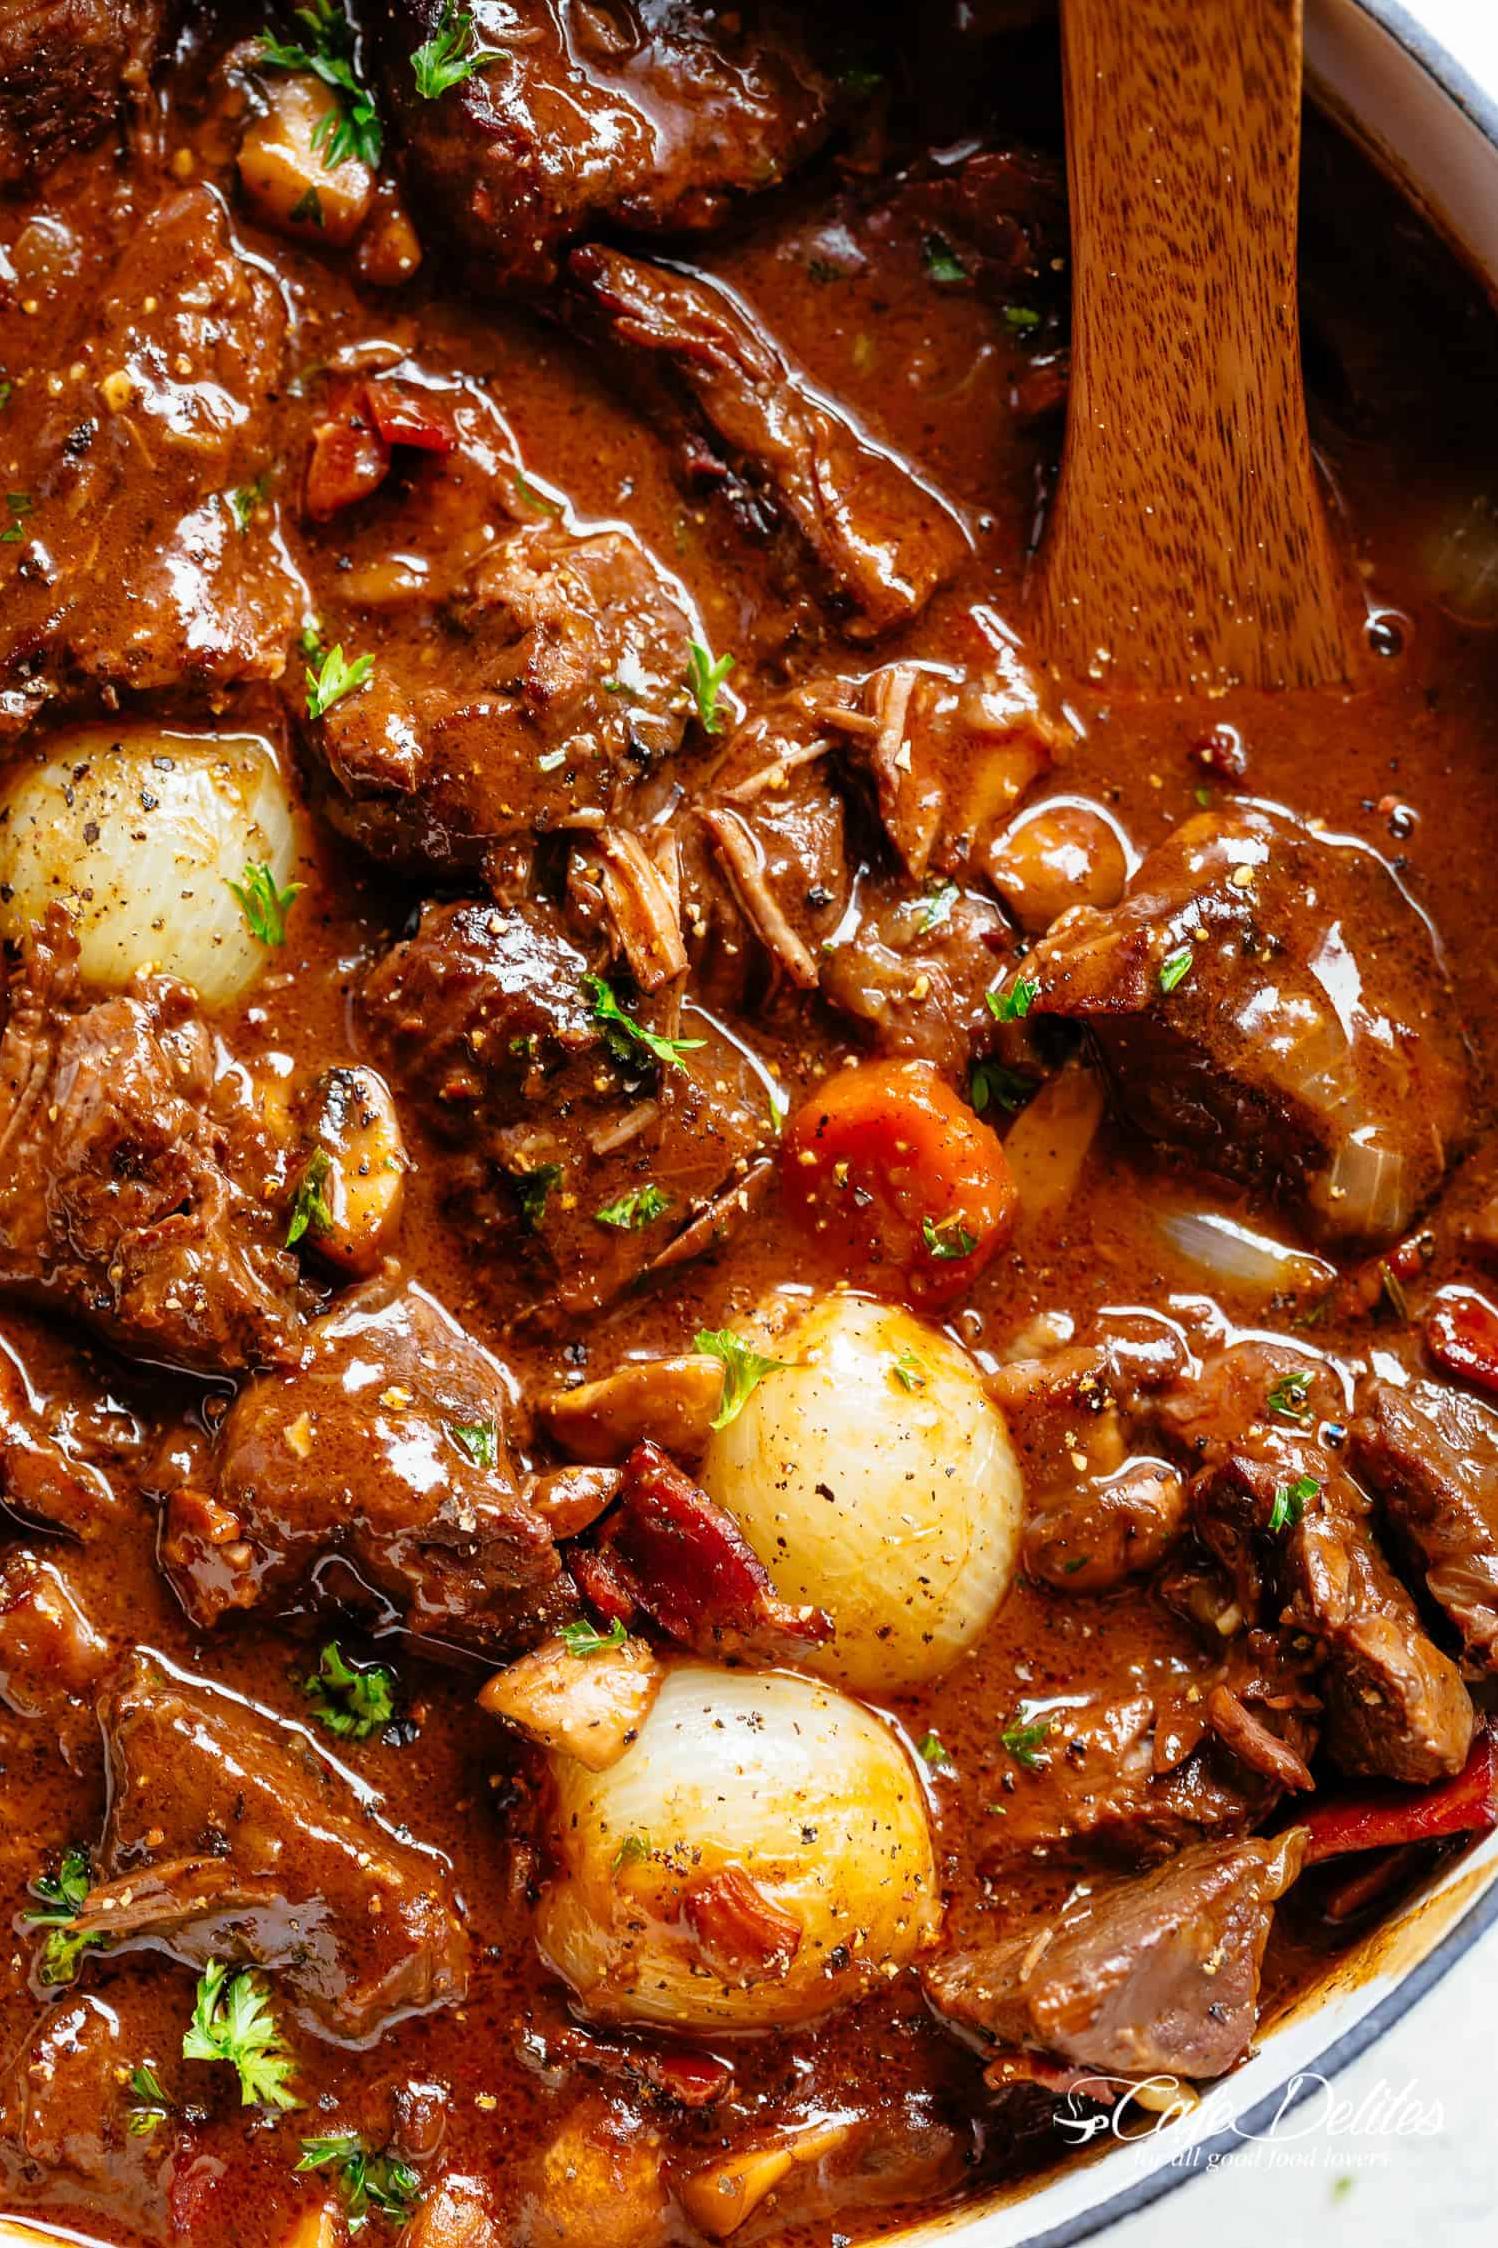  The tender beef is cooked to perfection in red wine, giving it a melt-in-your-mouth texture.